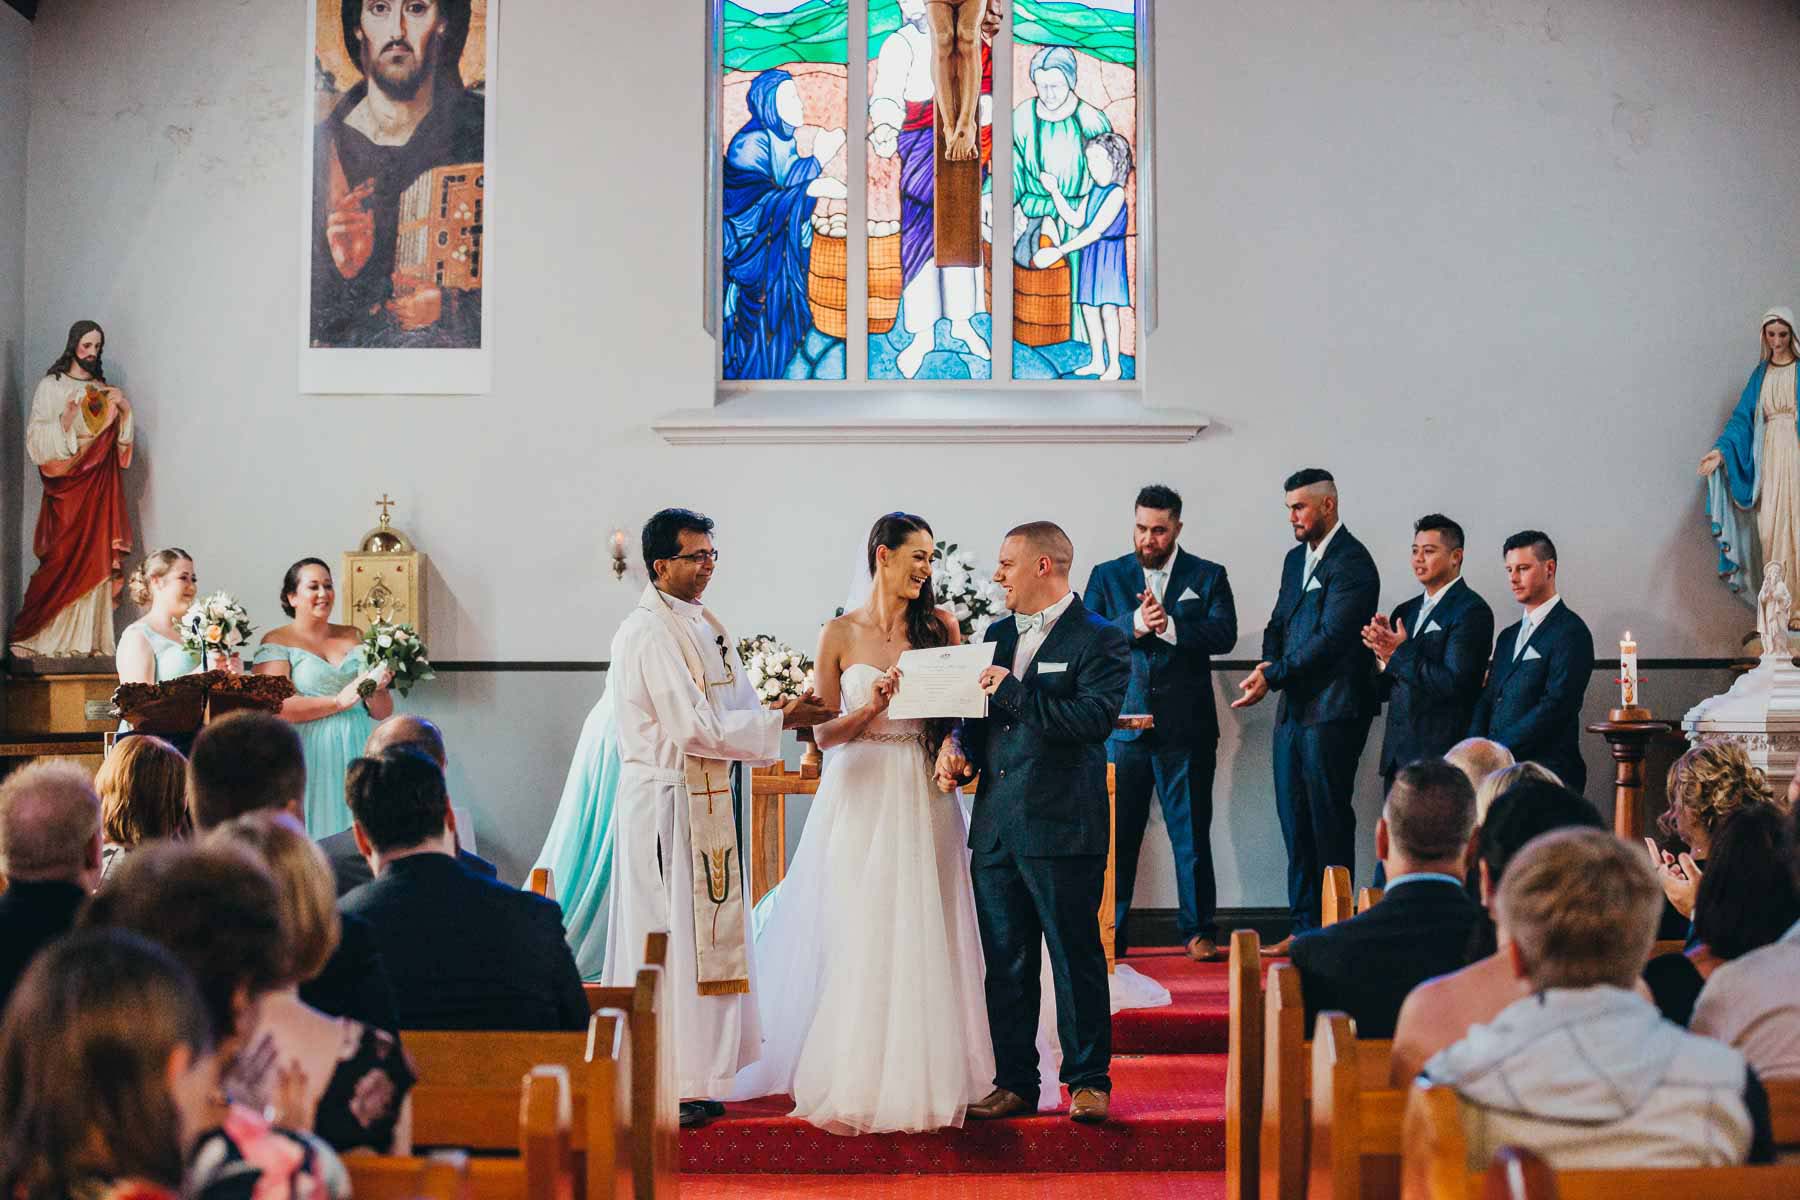 A couple show off their marriage certificate during their church ceremony